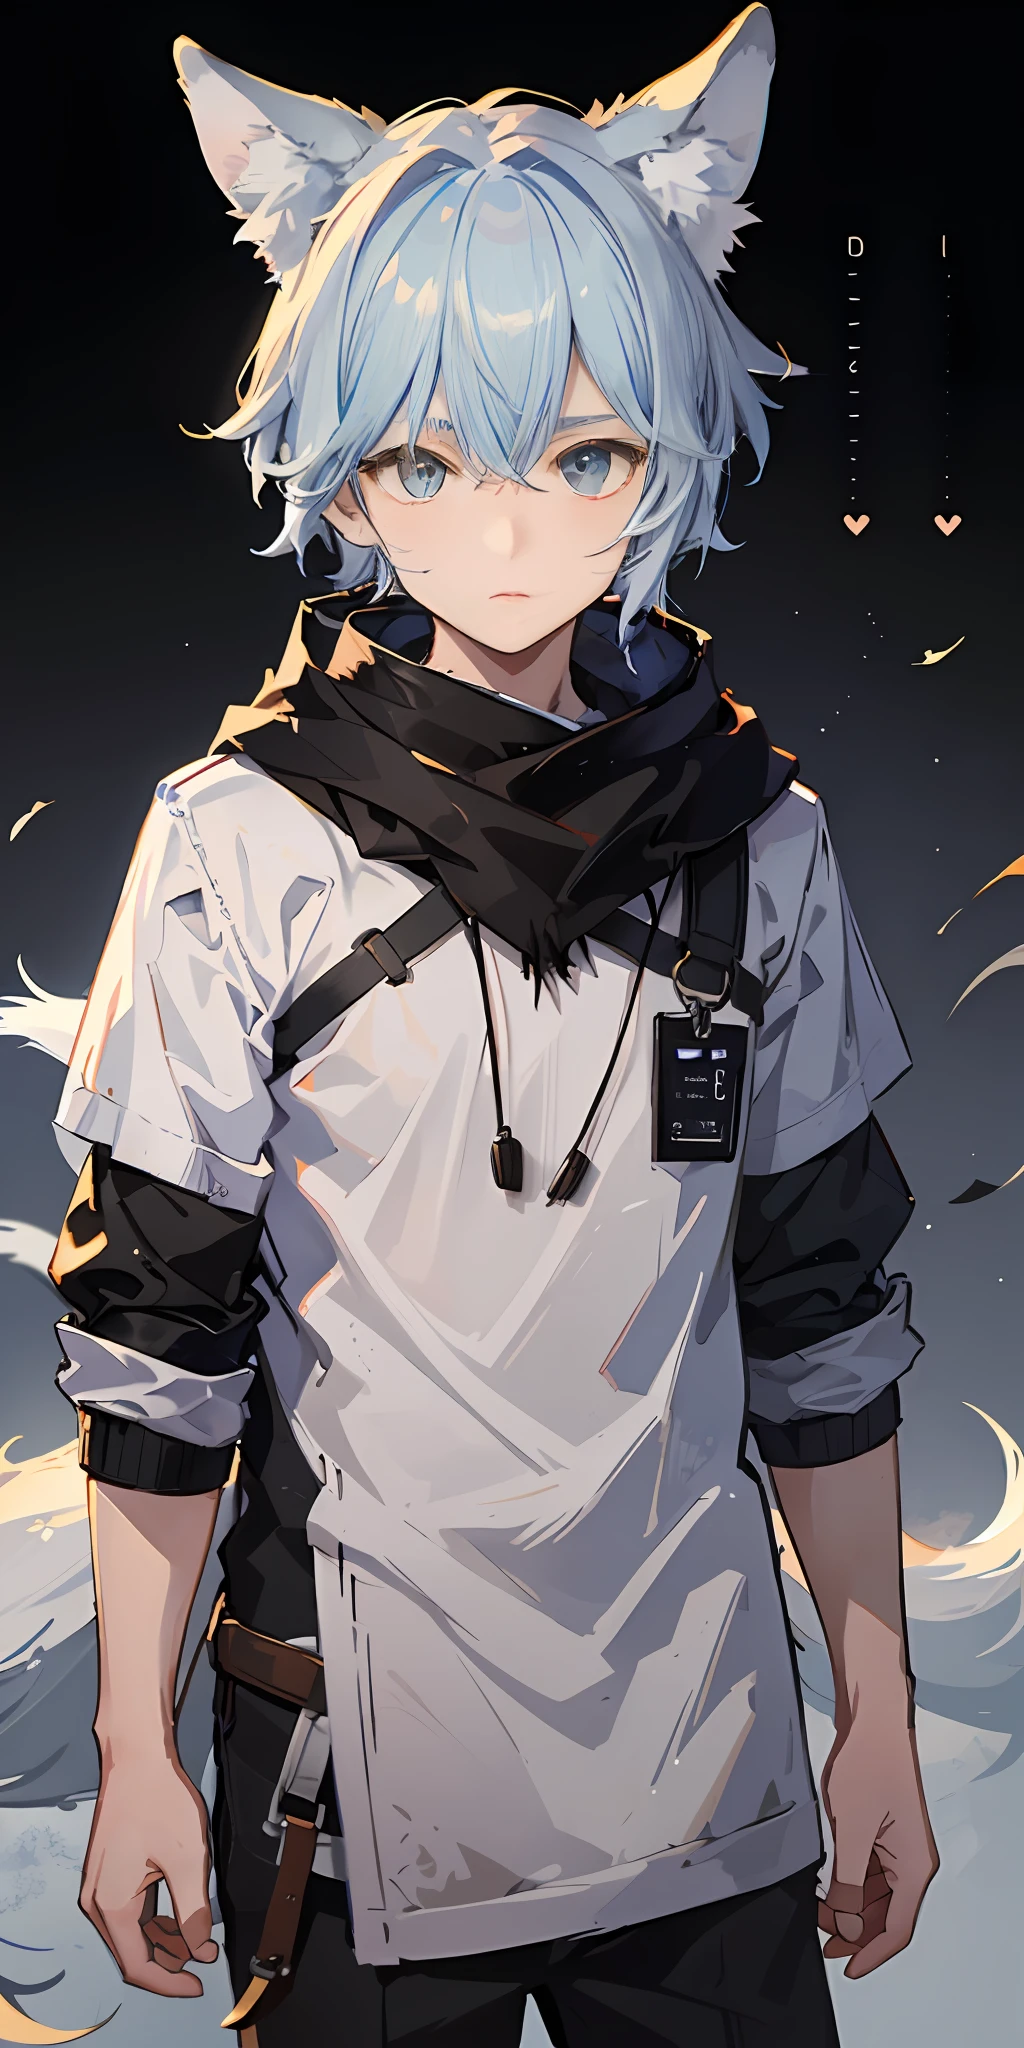 1boy，Shota，(high-definition quality，Masterpiece level)，Fresh and cold boy character，Wolf ears、Wolf Tail highlights the sense of belonging to the character，Heterochromatic eyes and the color of light blue hair echo each other，with clean lines，Show the modesty and confidence of the character，tmasterpiece, lightblue hair, Heterochromic eyes,(Wolf ears),(Wolf tail)，One tail，A young boy with，Lean body type，Dull hair，Brown pick dye，with fair skin，Functional wind